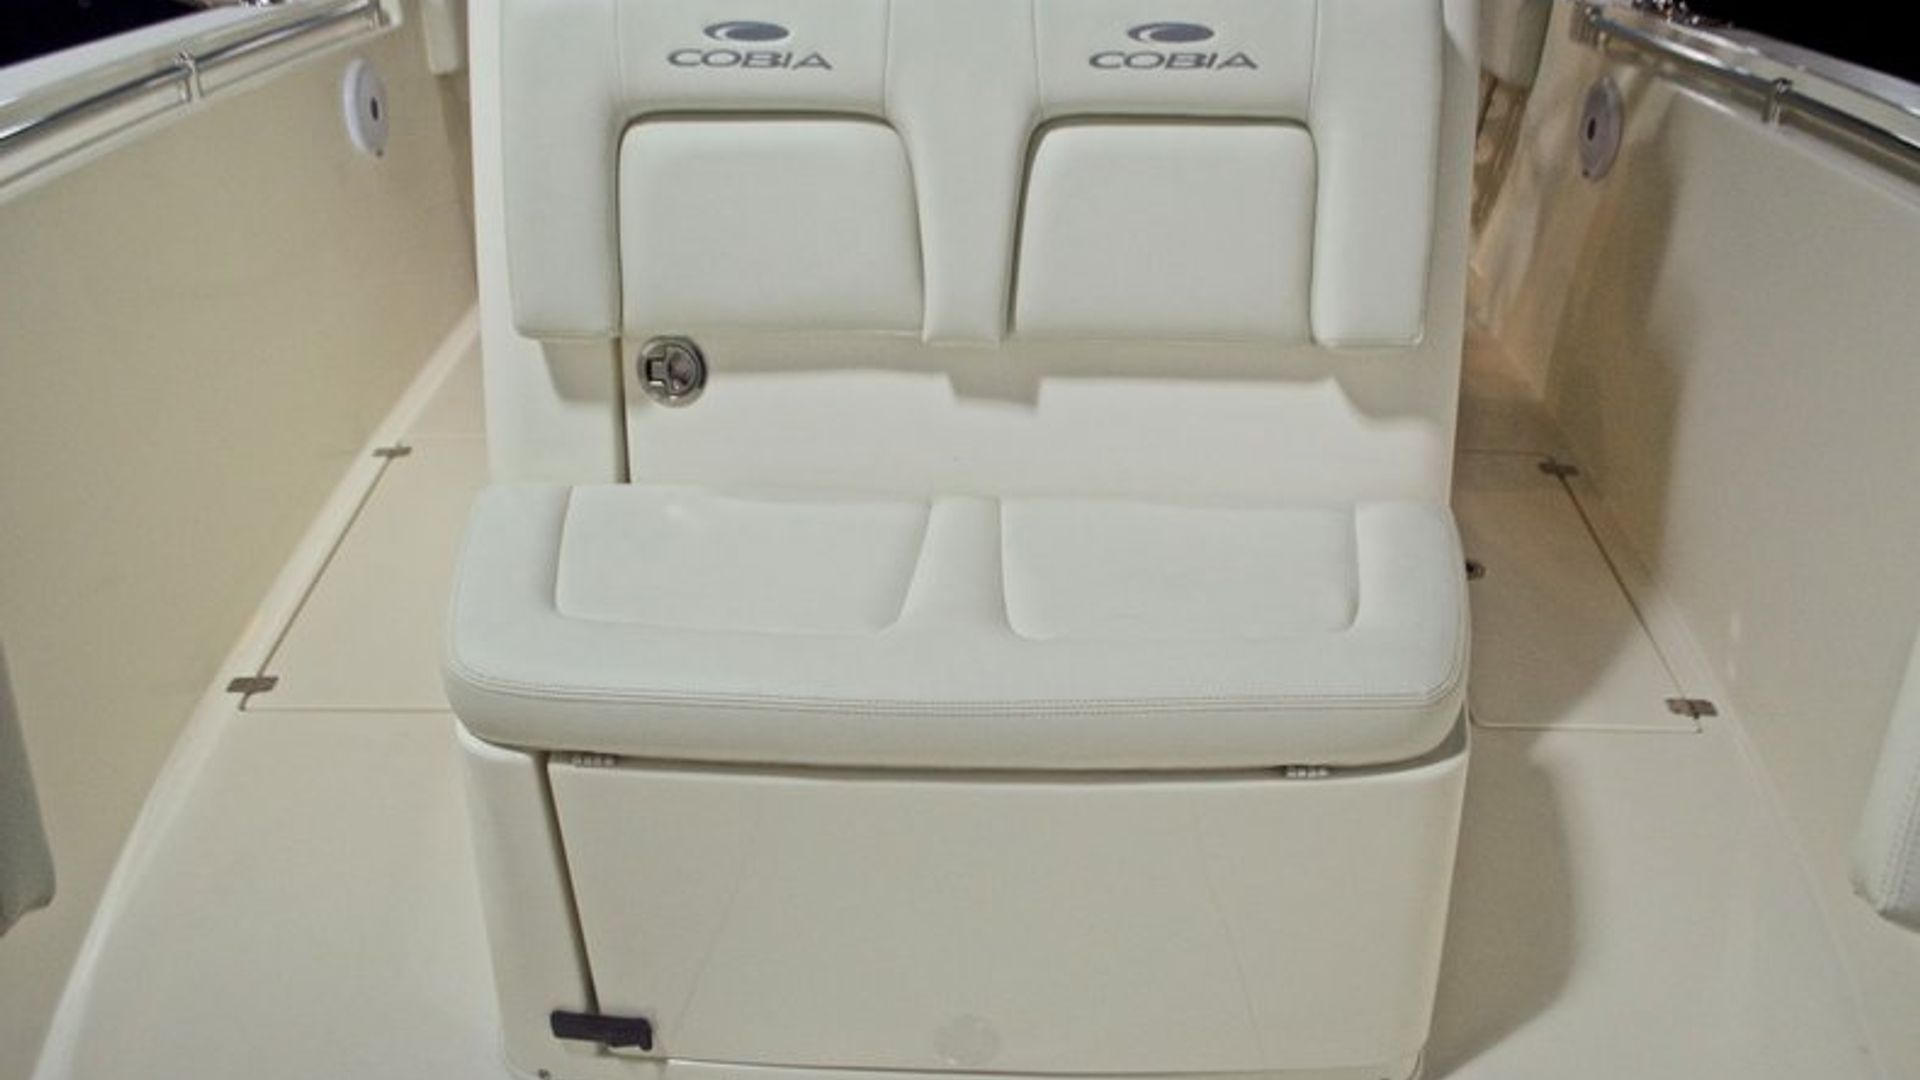 New 2017 Cobia 296 Center Console #N027 image 56